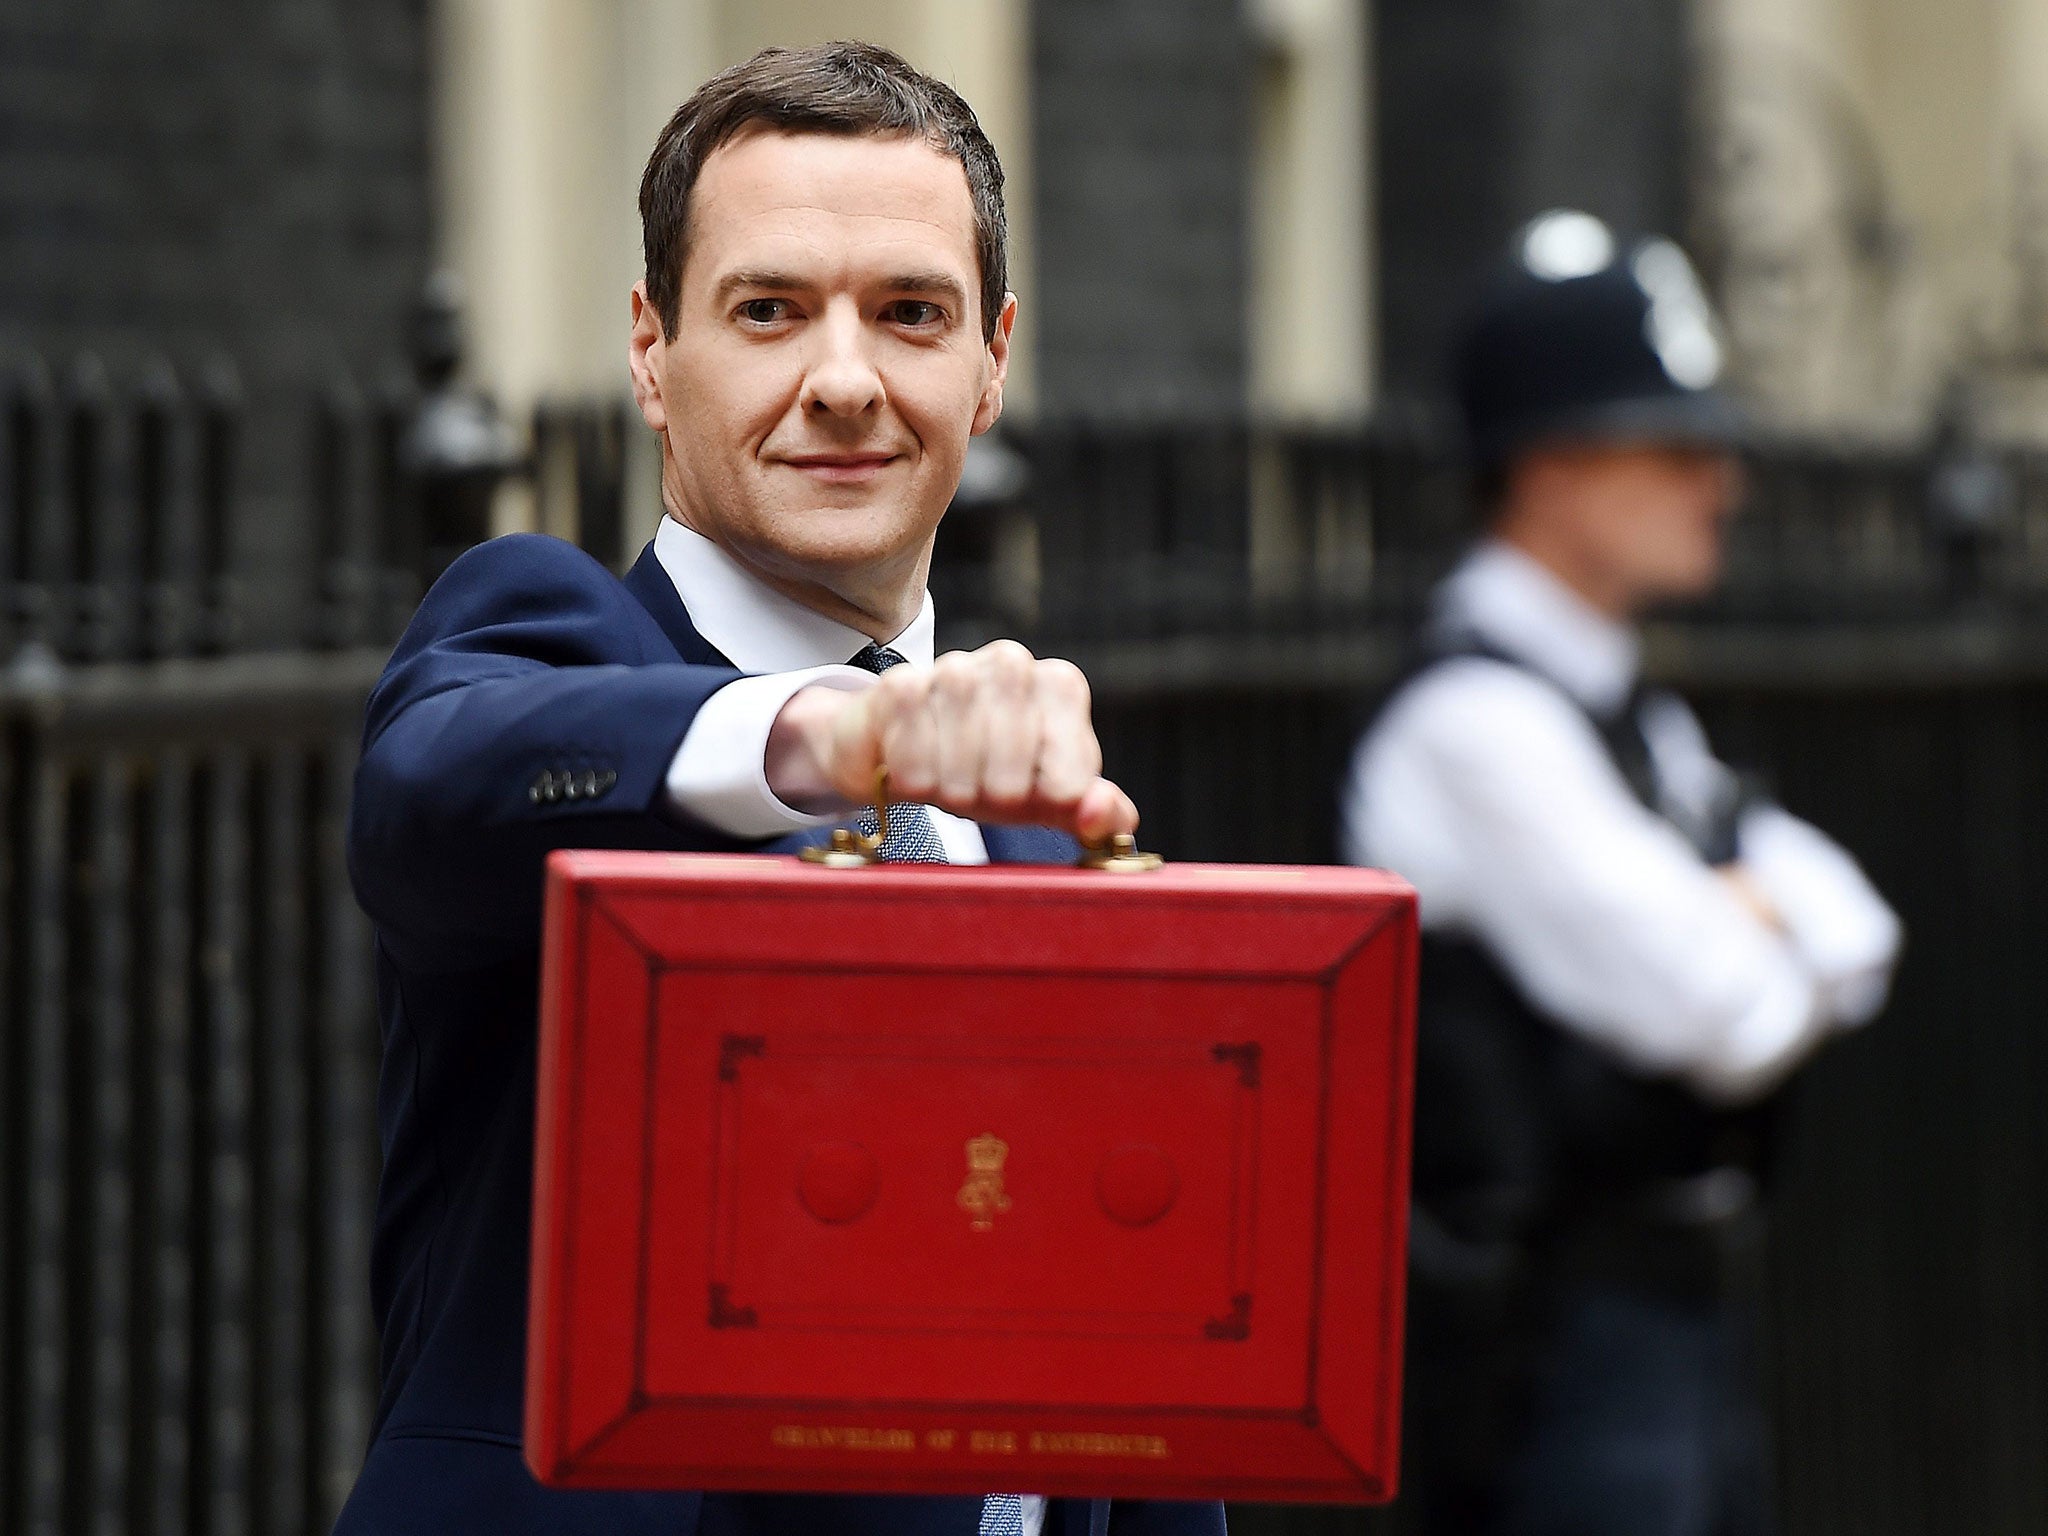 George Osborne holds up the red briefcase outside No 11 Downing Street prior to announcing his budget to parliament in London